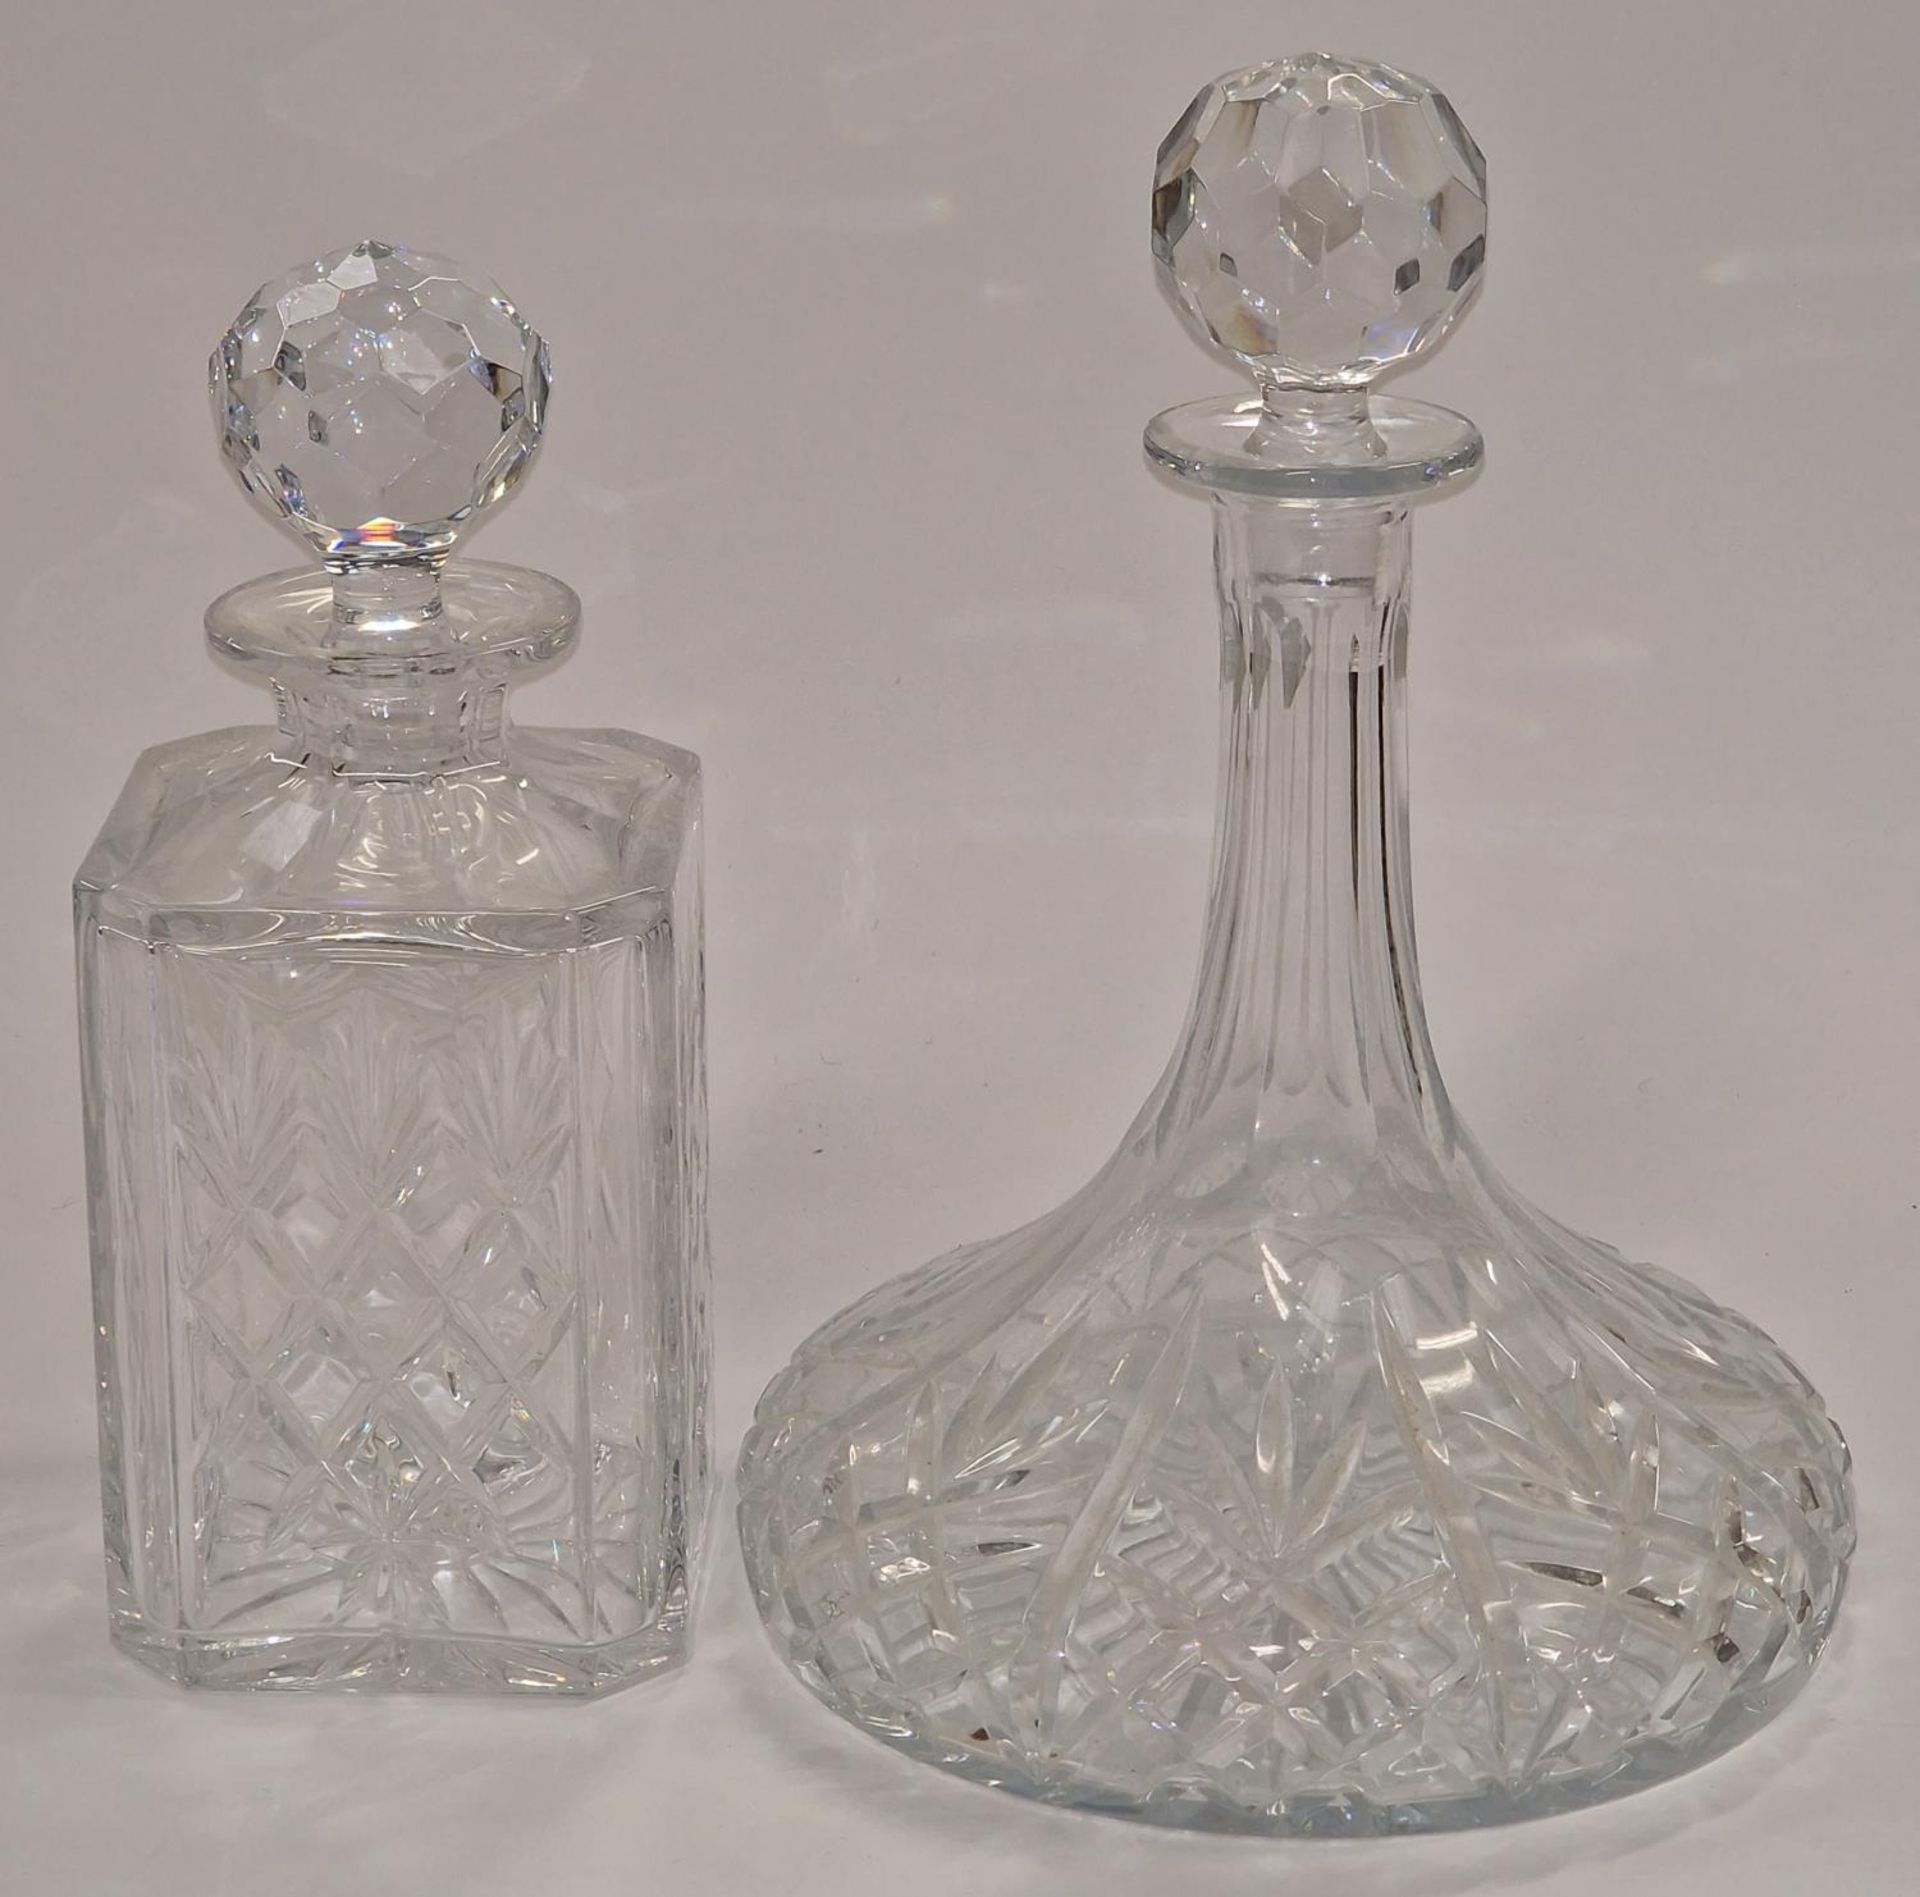 Two crystal glass decanters.